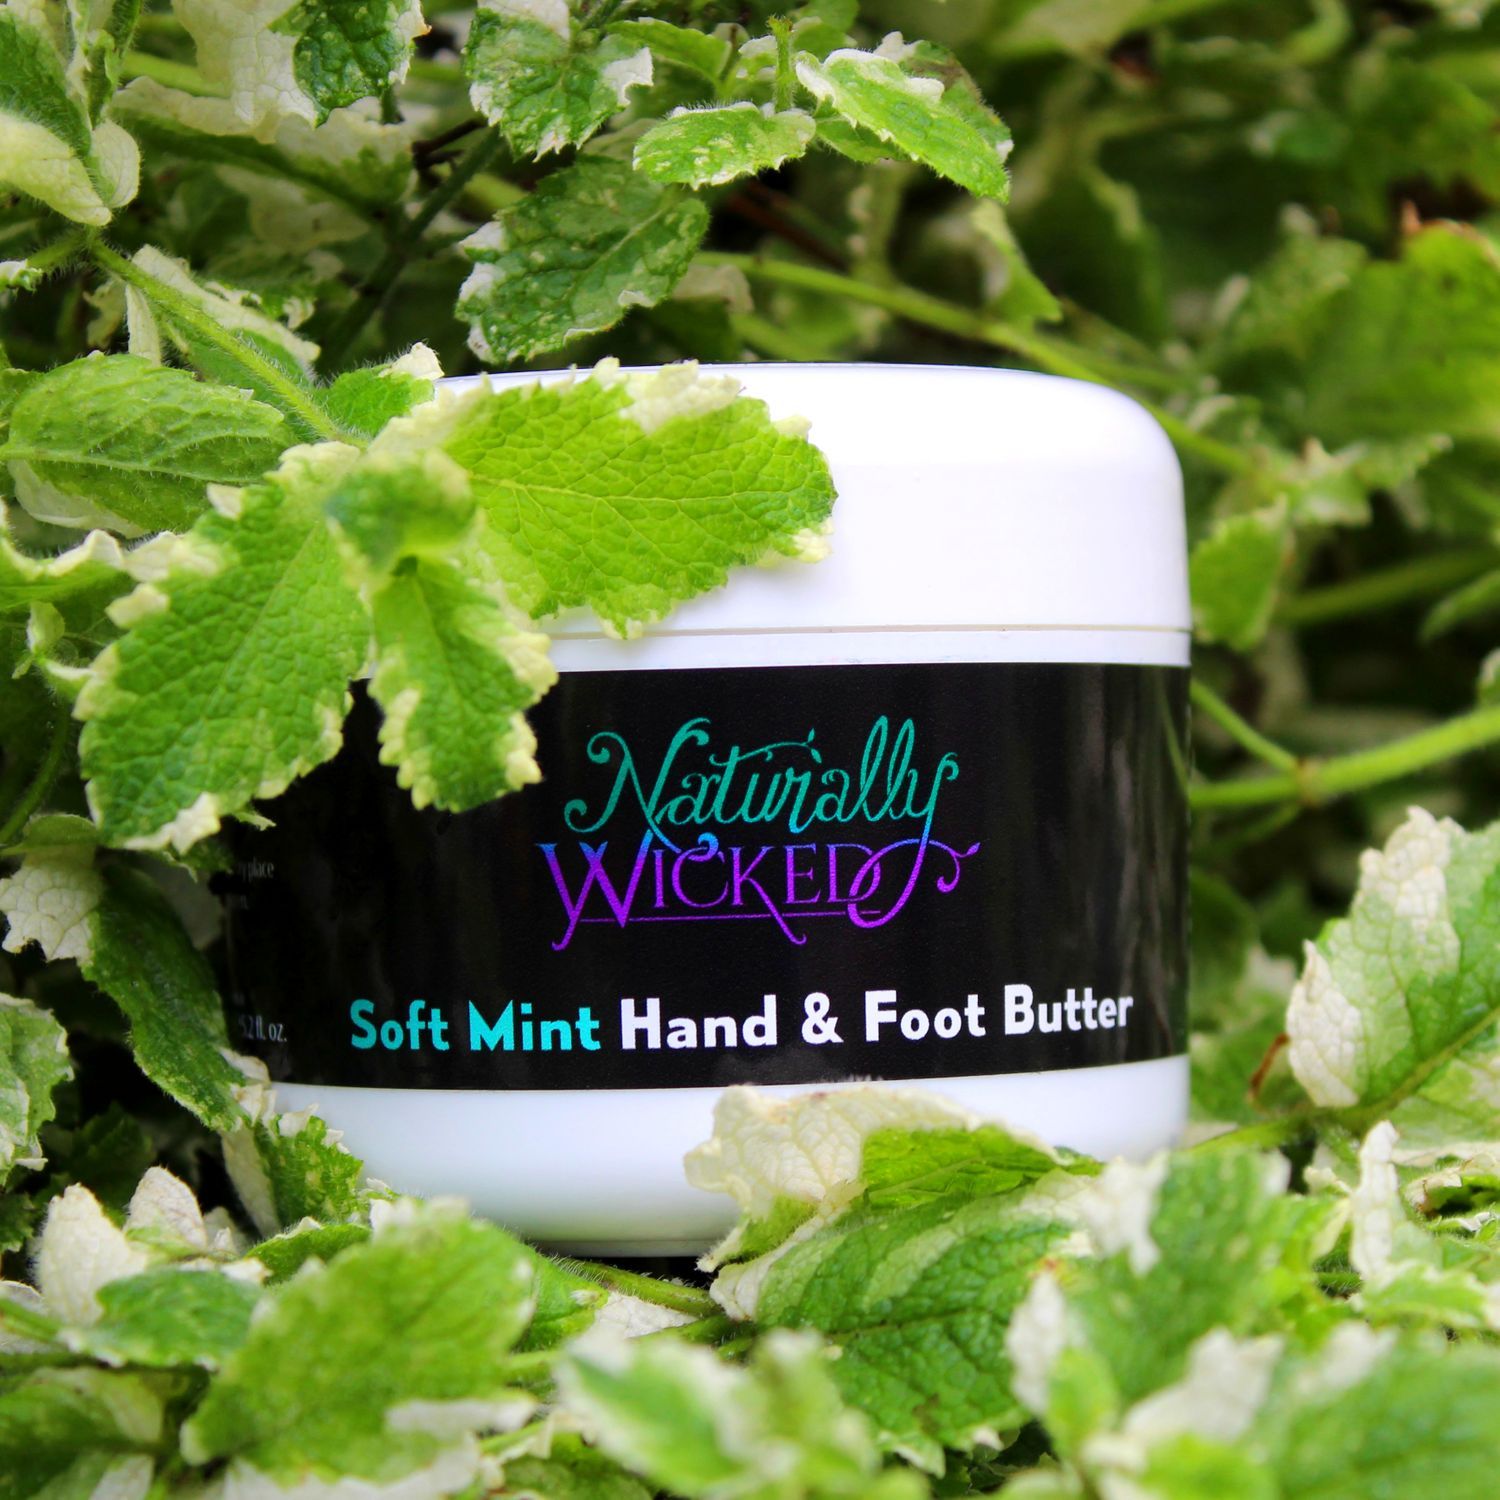 Naturally Wicked Soft Mint Hand & Foot Butter Surrounded By Bright Green Variegated Mint Leaves